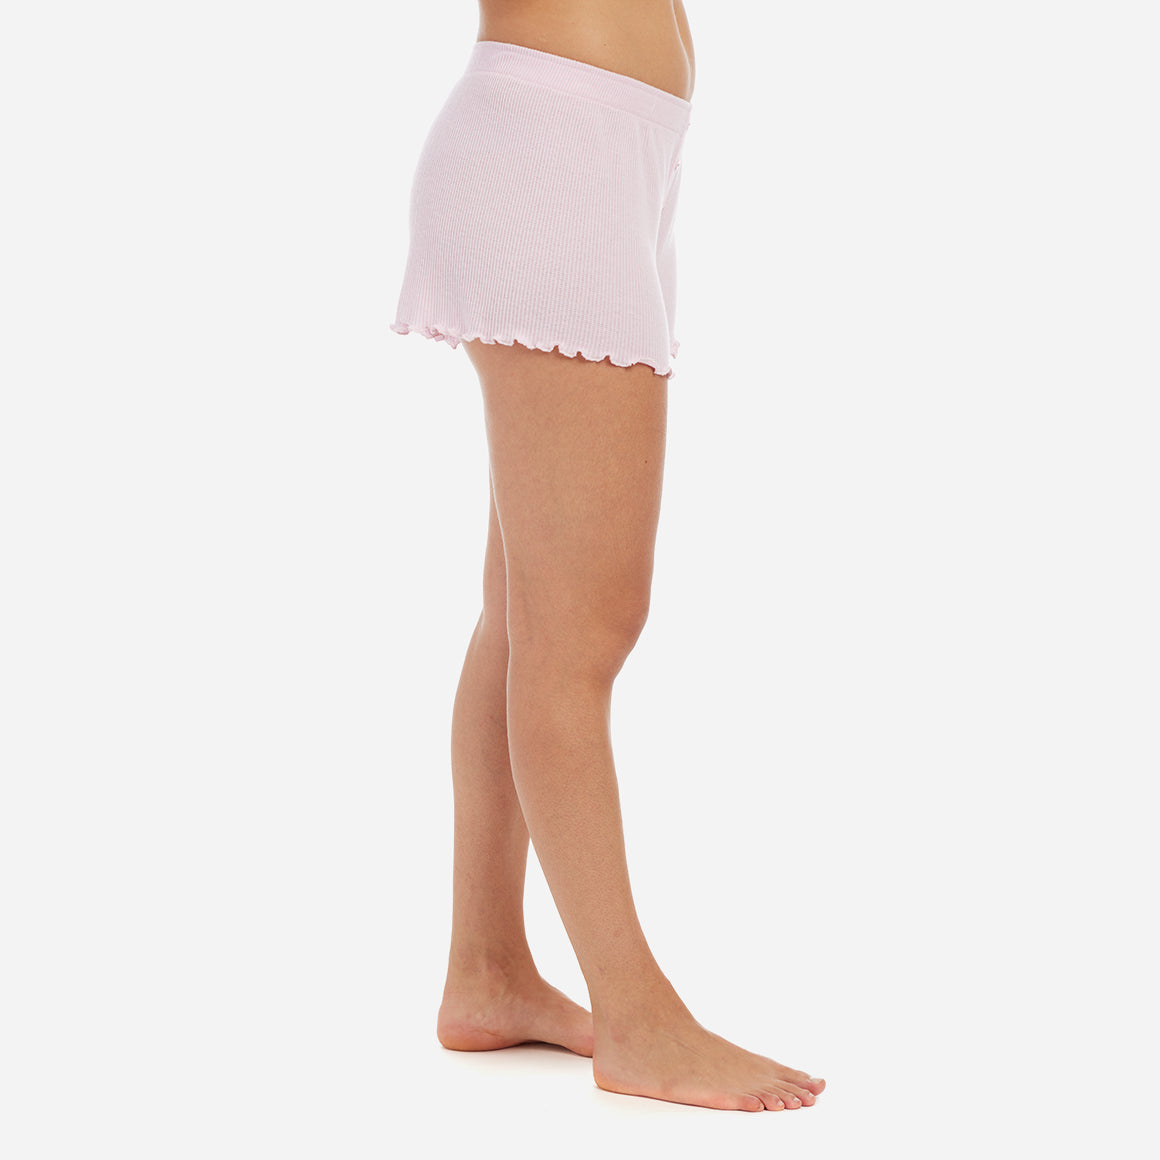 This ribbed pj short has a cozy fit that features flirty merrow edge hems, faux buttons at the fly, and a comfortable elastic waistband for a personalized fit, allowing you to move freely and unrestricted.